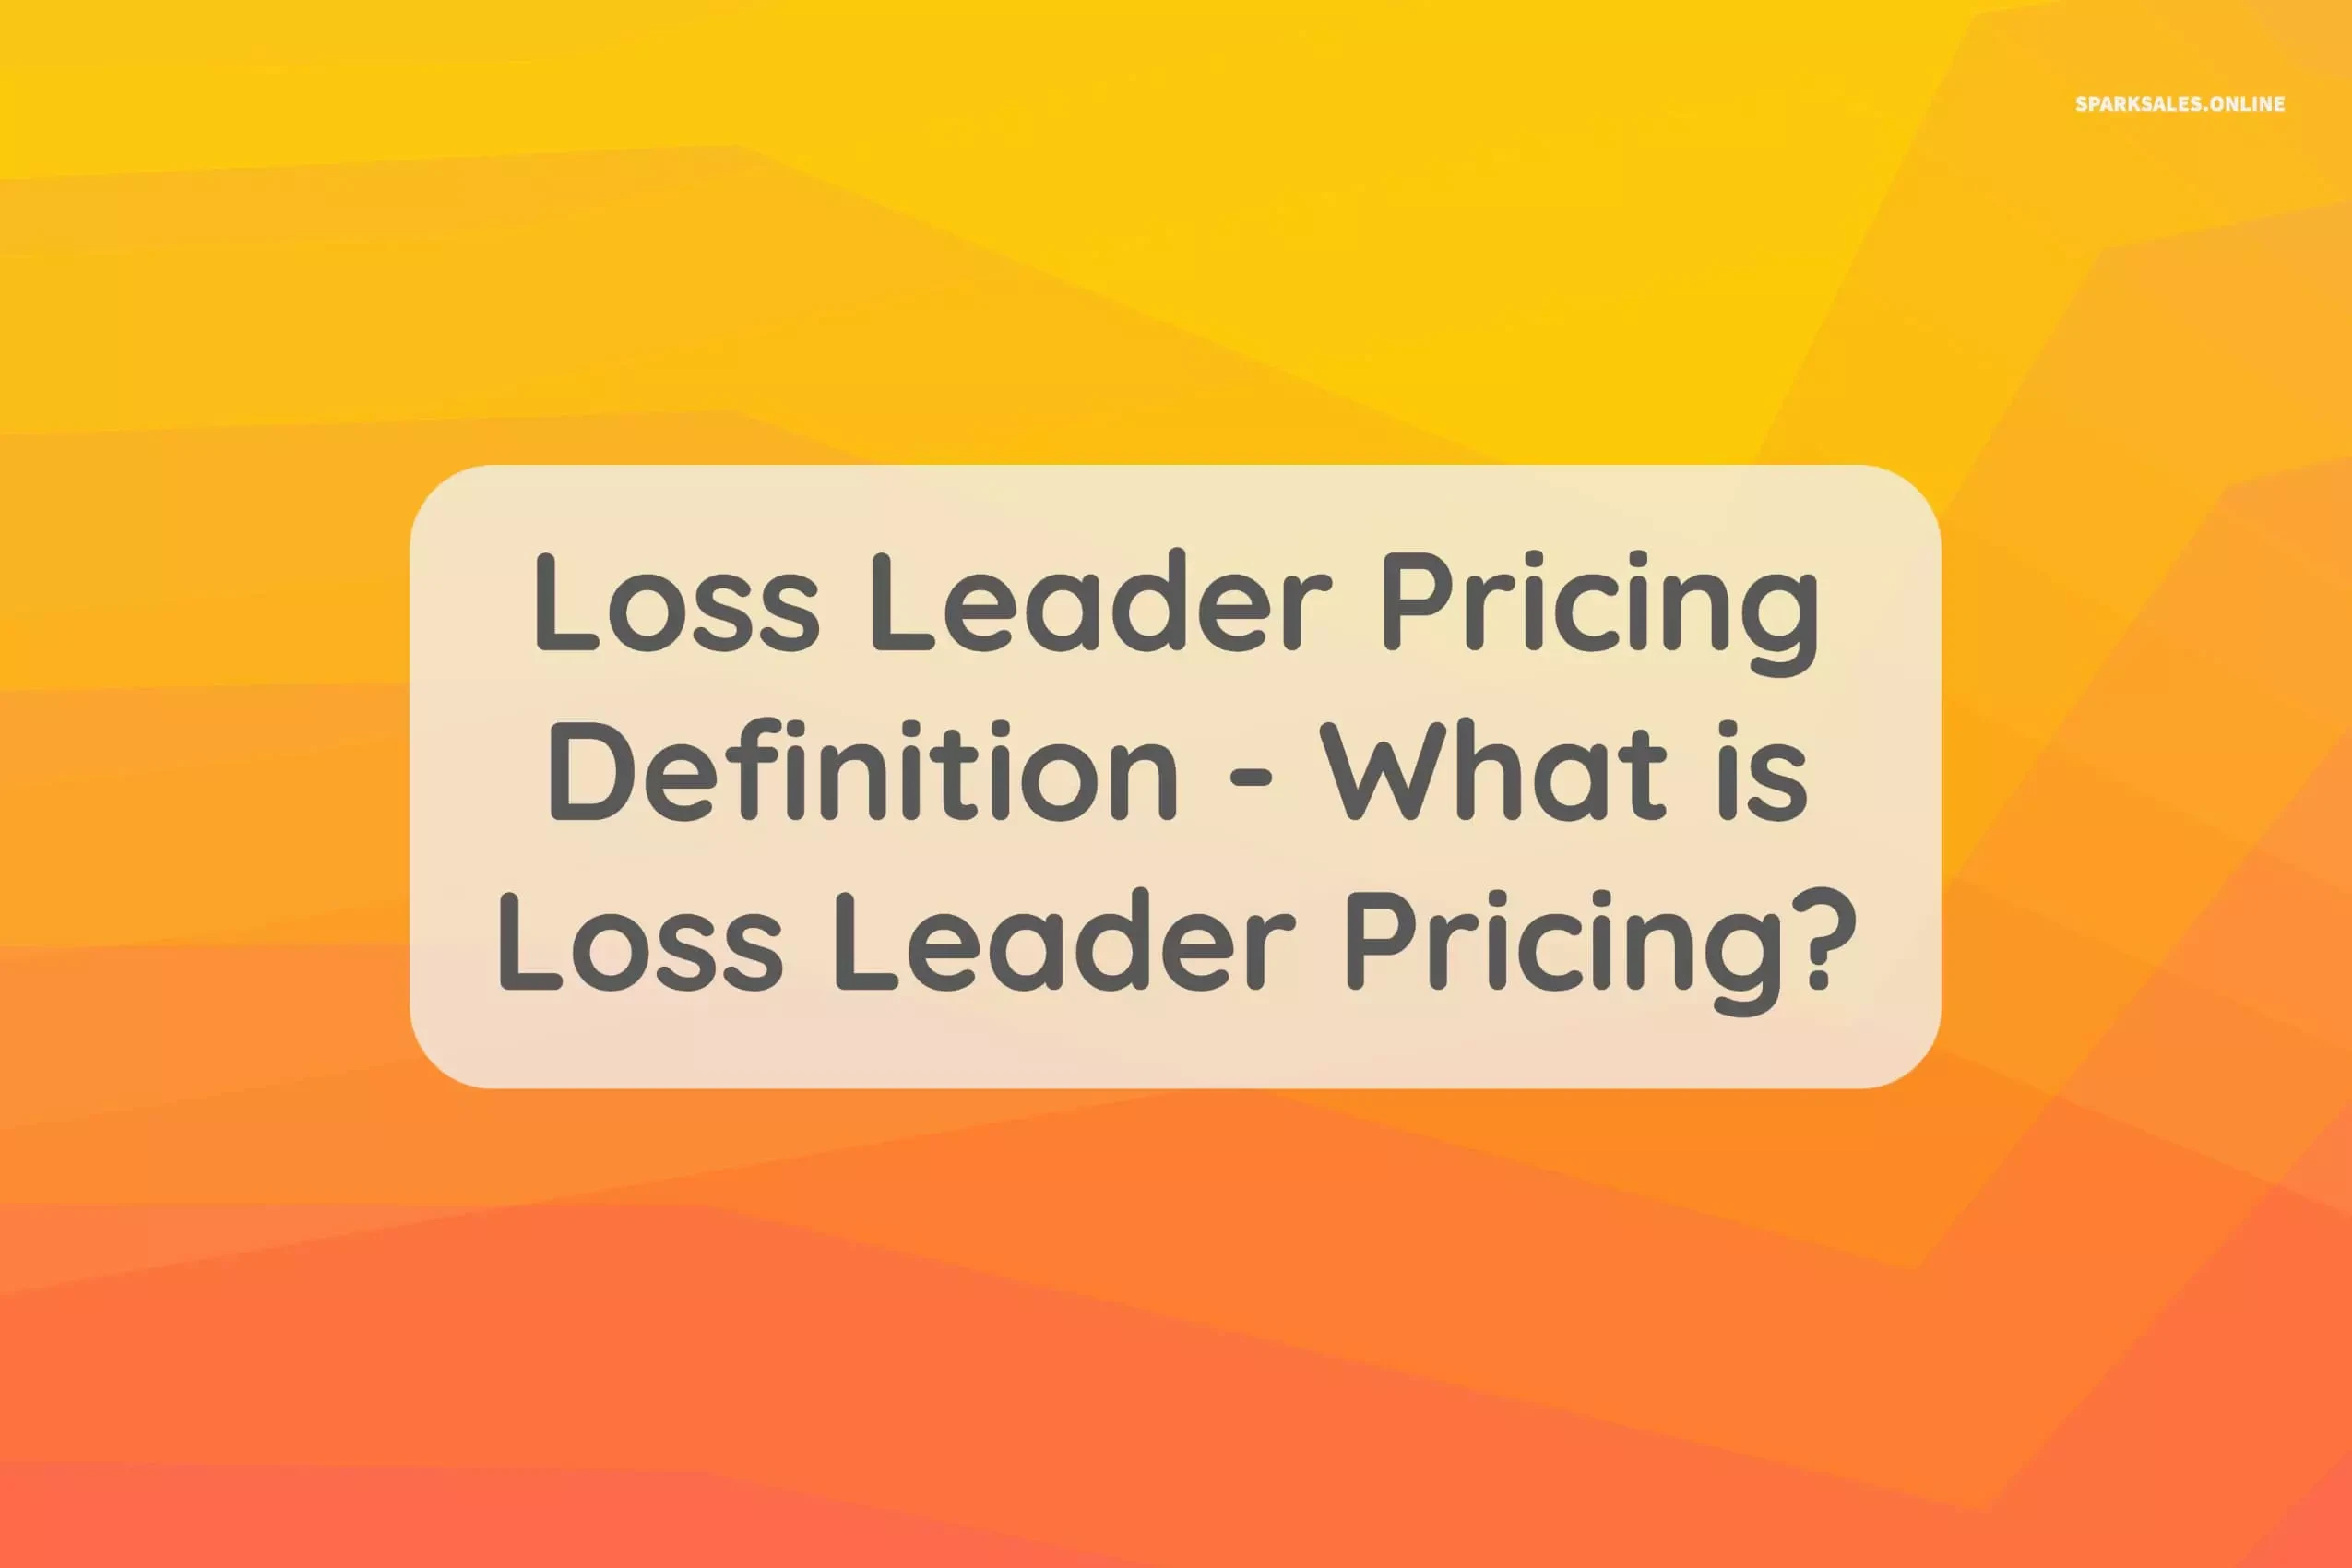 Loss Leader Pricing Definition – What is Loss Leader Pricing?